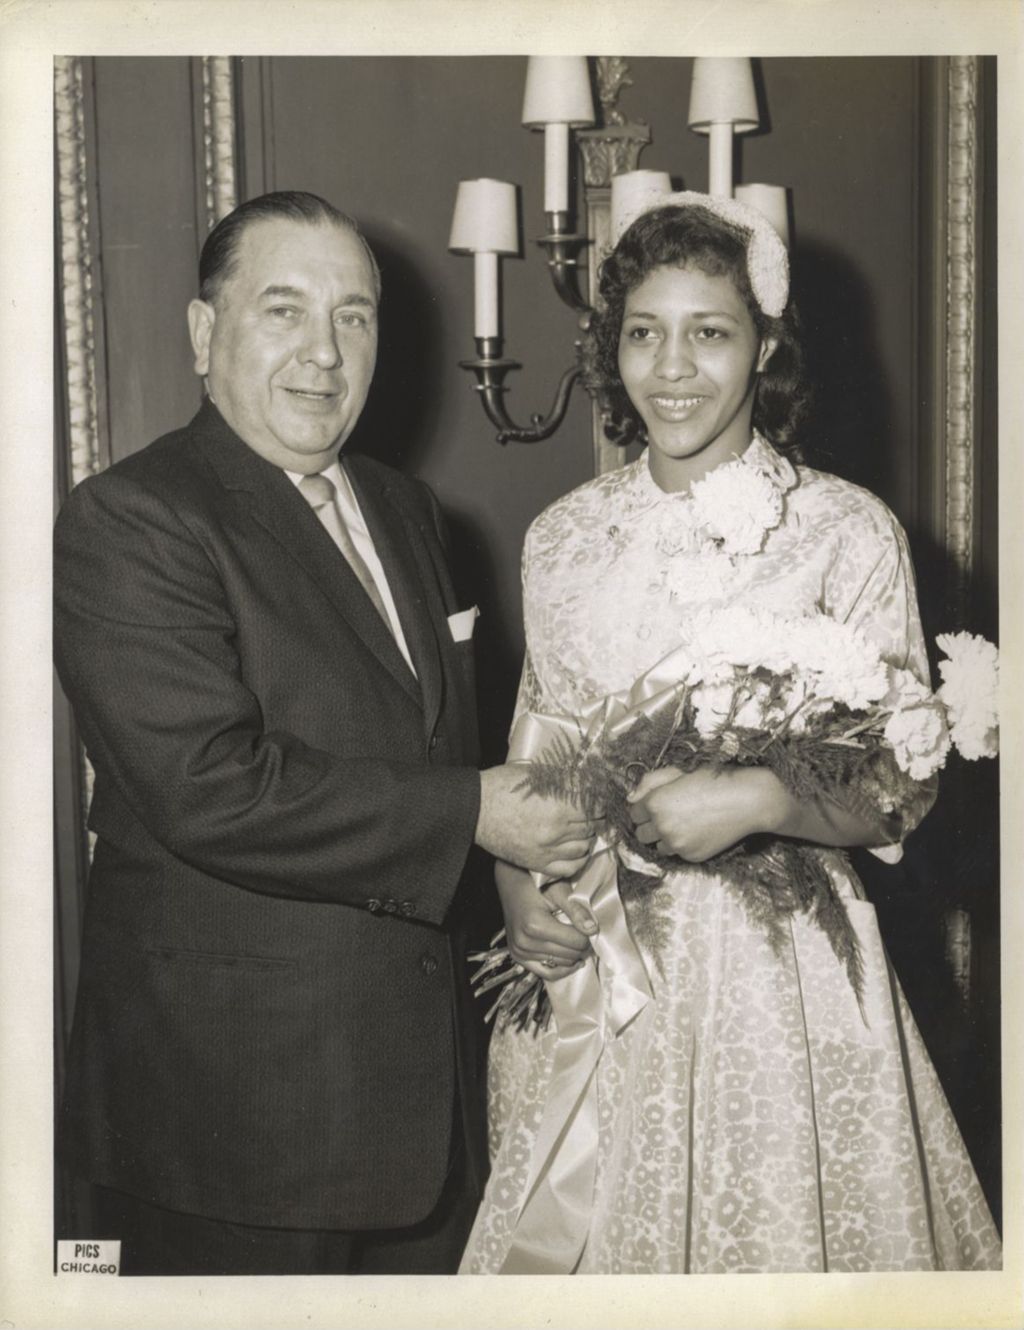 Richard J. Daley presenting flowers to an African-American woman